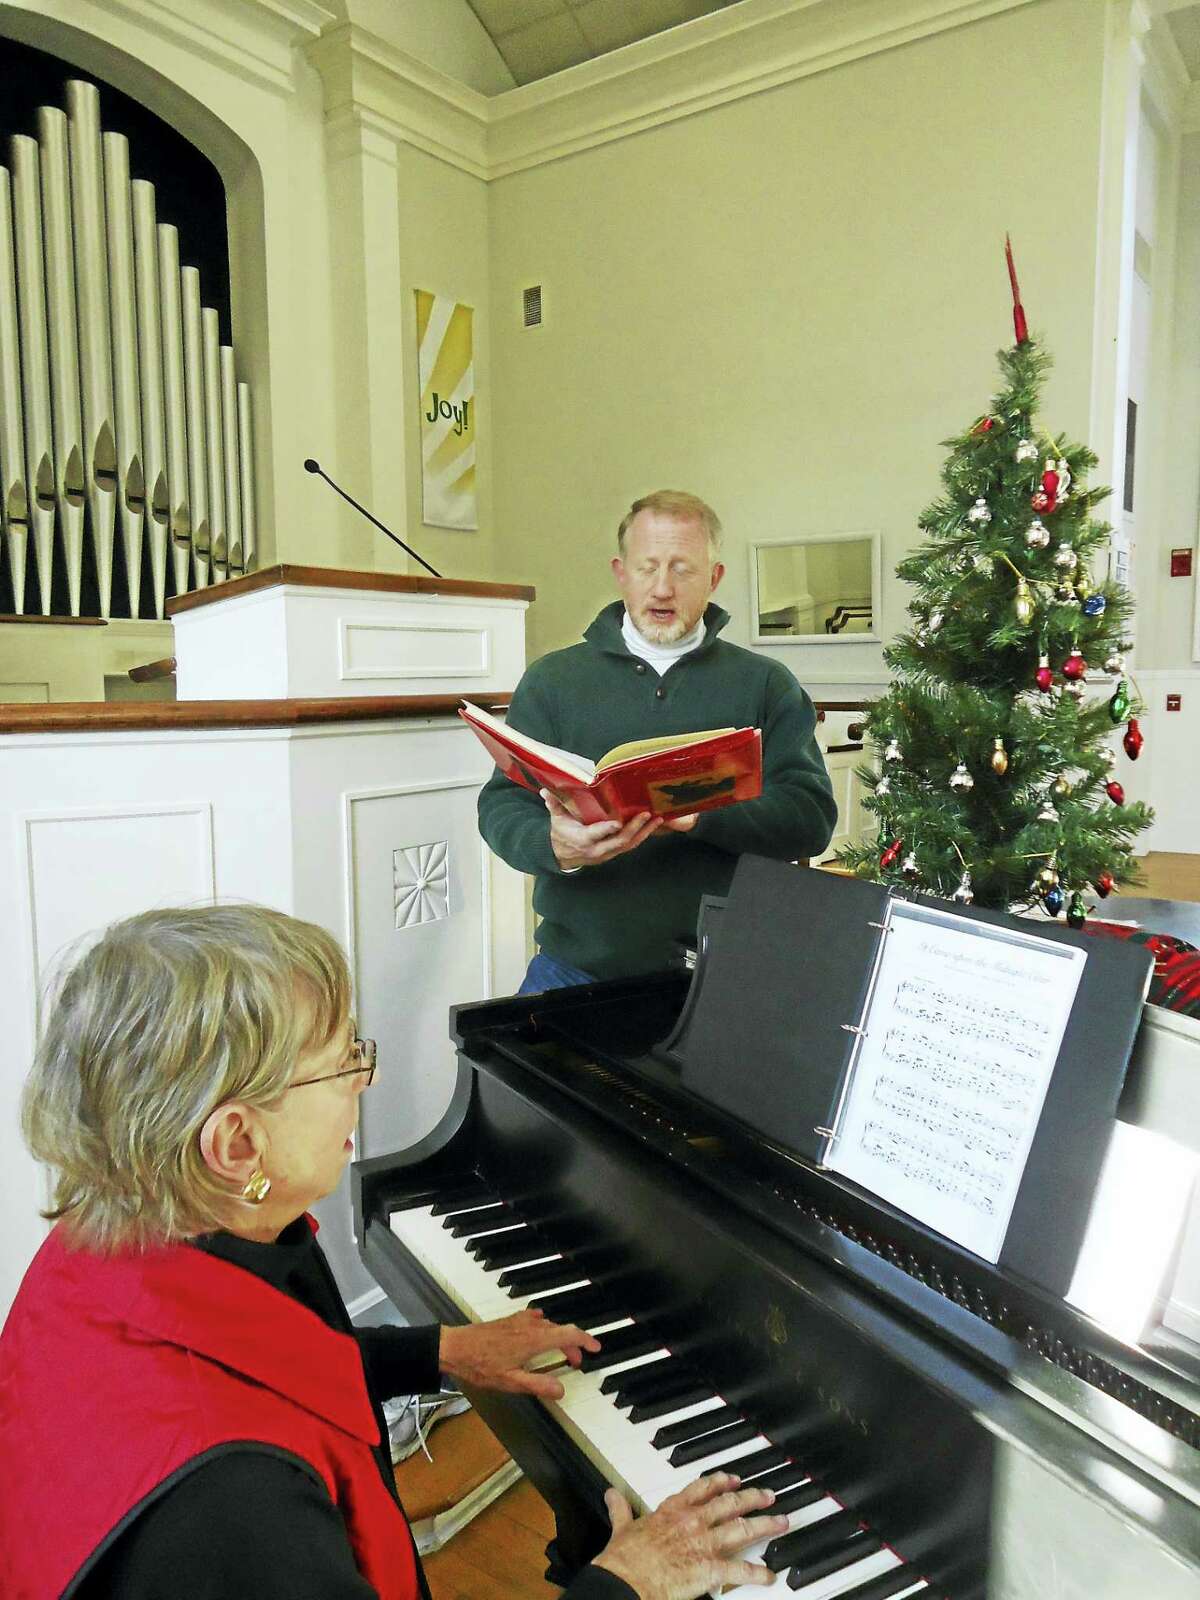 Accompanying photograph:A Christmas Soiree! Rev. Kenneth Peterkin, Pastor of The First Congregational Church in Essex and Essex resident Marian Messek on piano will perform holiday music and lead a carol sing at the Church's Christmas Soiree on December 9 at 5:30 p.m. The evening also features wine and hors d'oeuvres. Admission is $12 per person. Proceeds from the event benefit the missions of the Church. For more information, call (860) 767-8097 or visit www.essexucc.org.